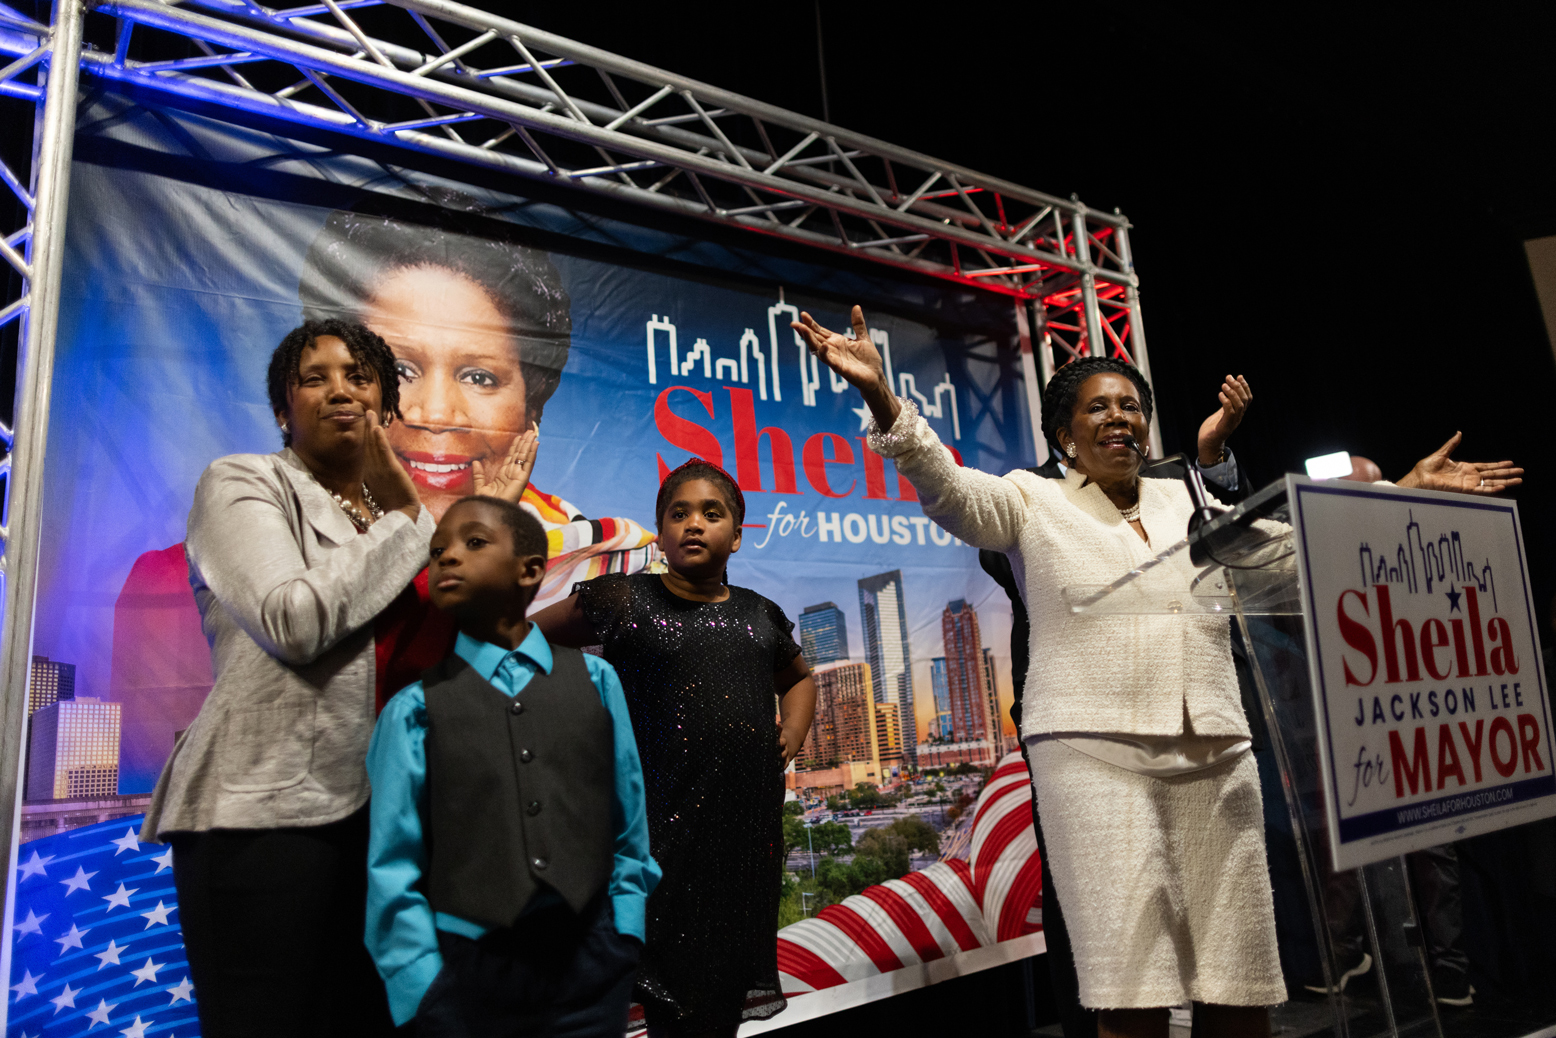 Congresswoman and Houston mayoral candidate Sheila Jackson Lee thanks her staff and supporters as she arrived to her election watch party